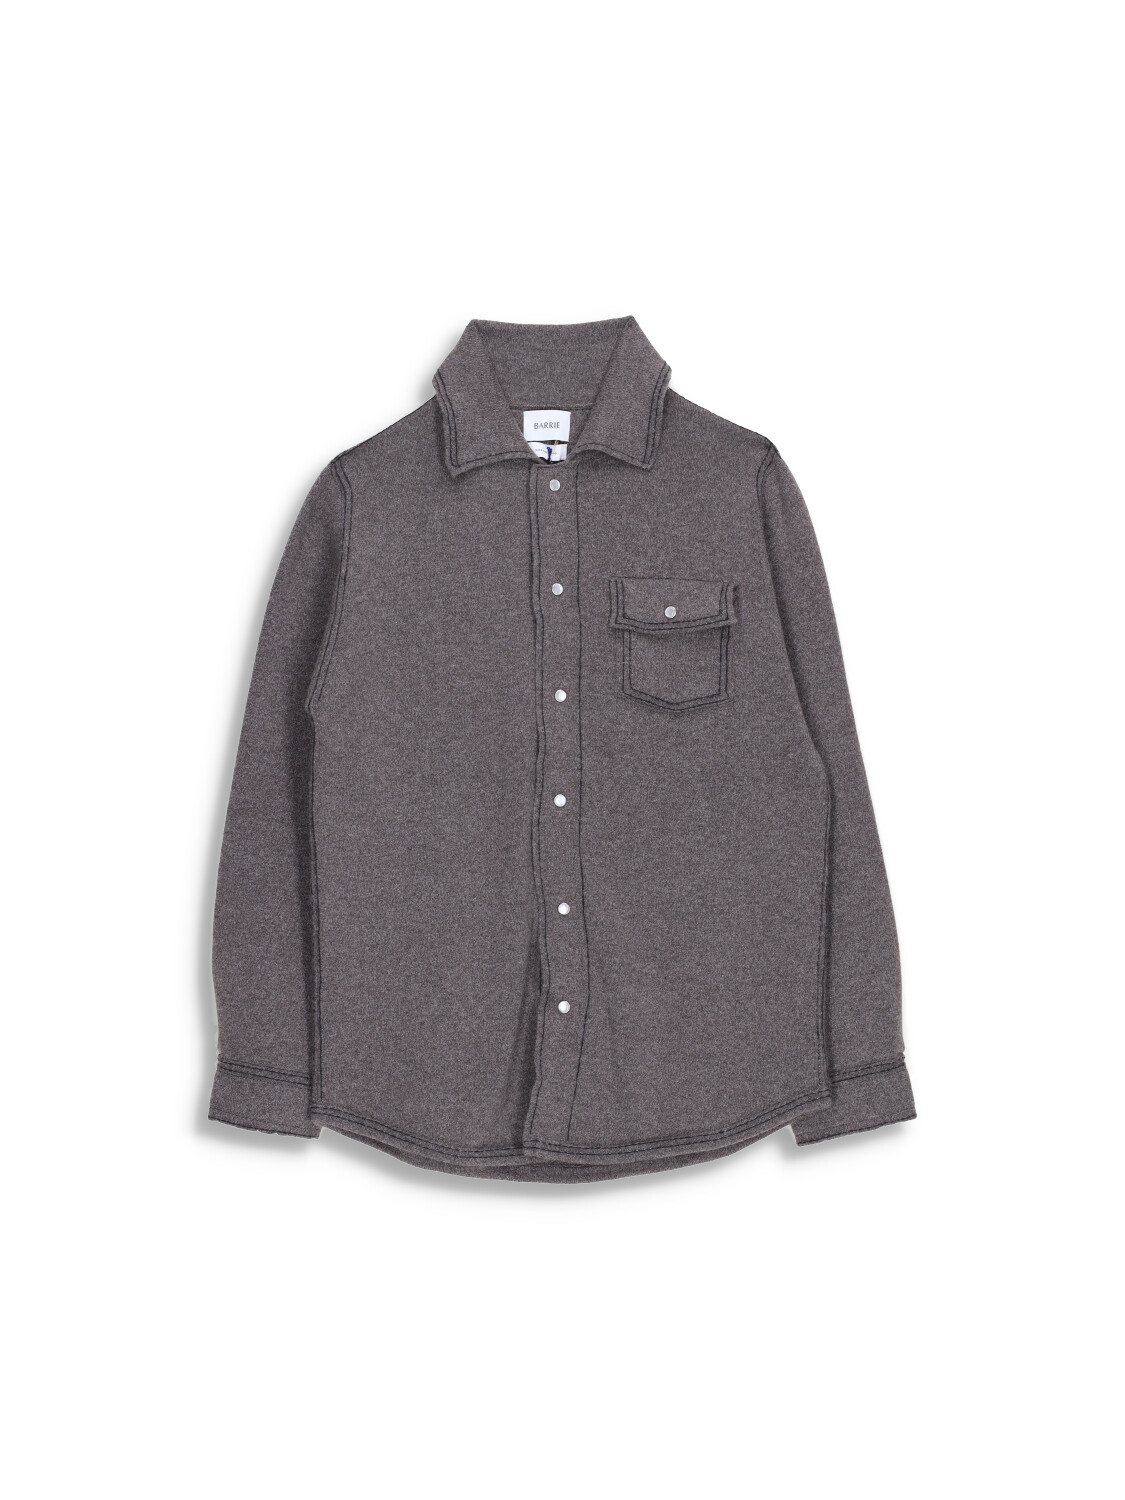 Barrie -  Cashmere shirt with button placket 